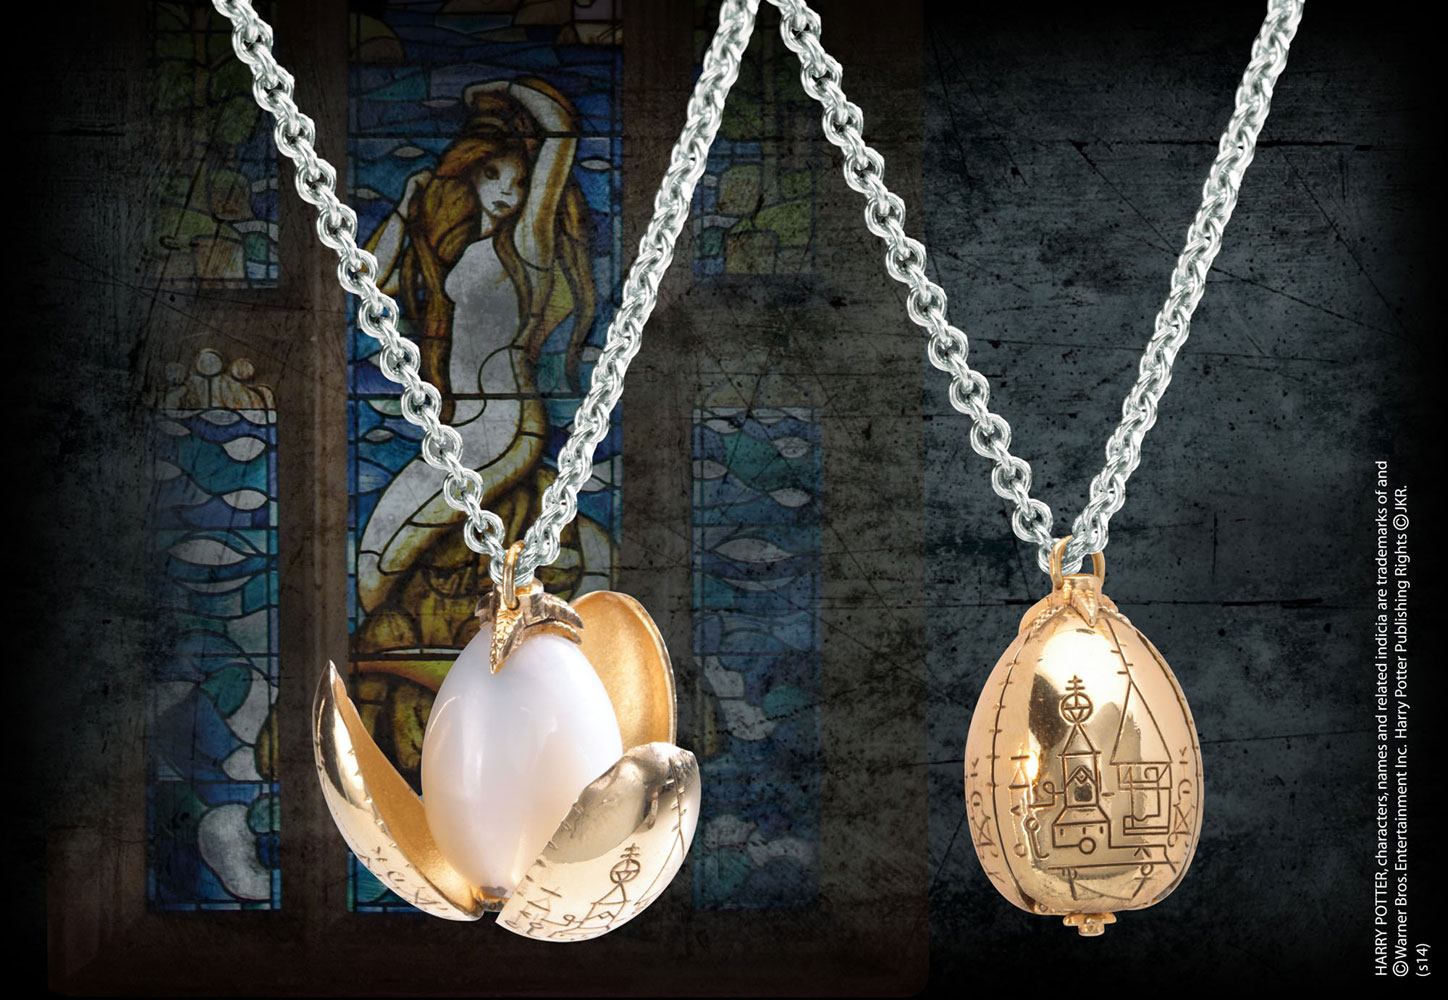 Harry Potter Pendant with Chain The Golden Egg